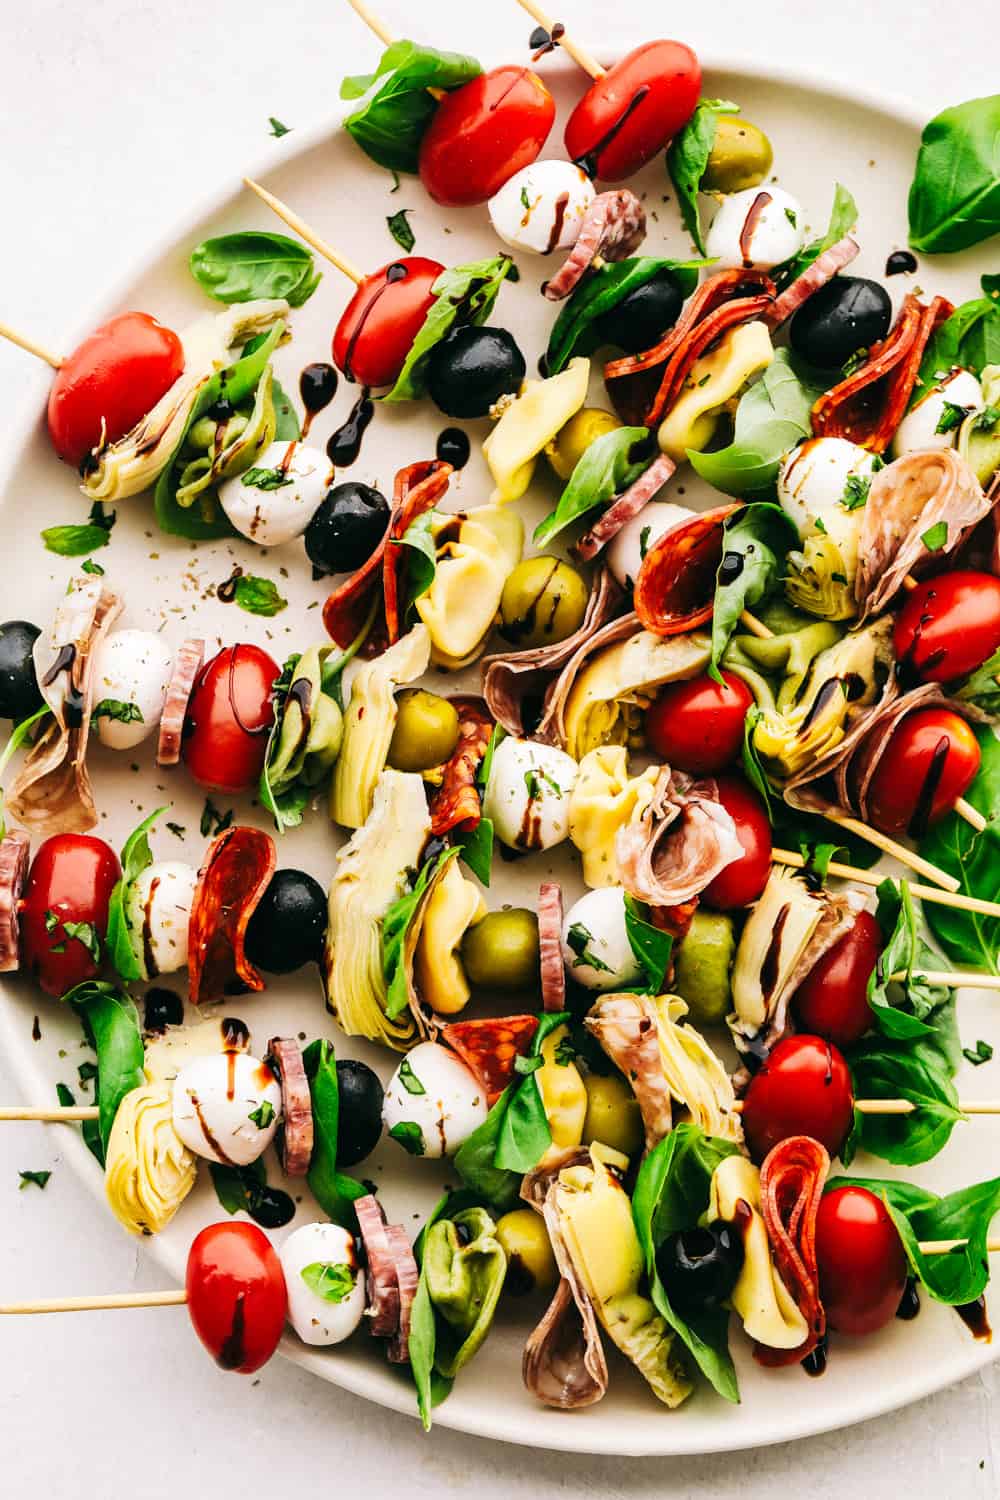 Antipasto skewers with cheese, olives, meats, spinach and cheese on a plate.